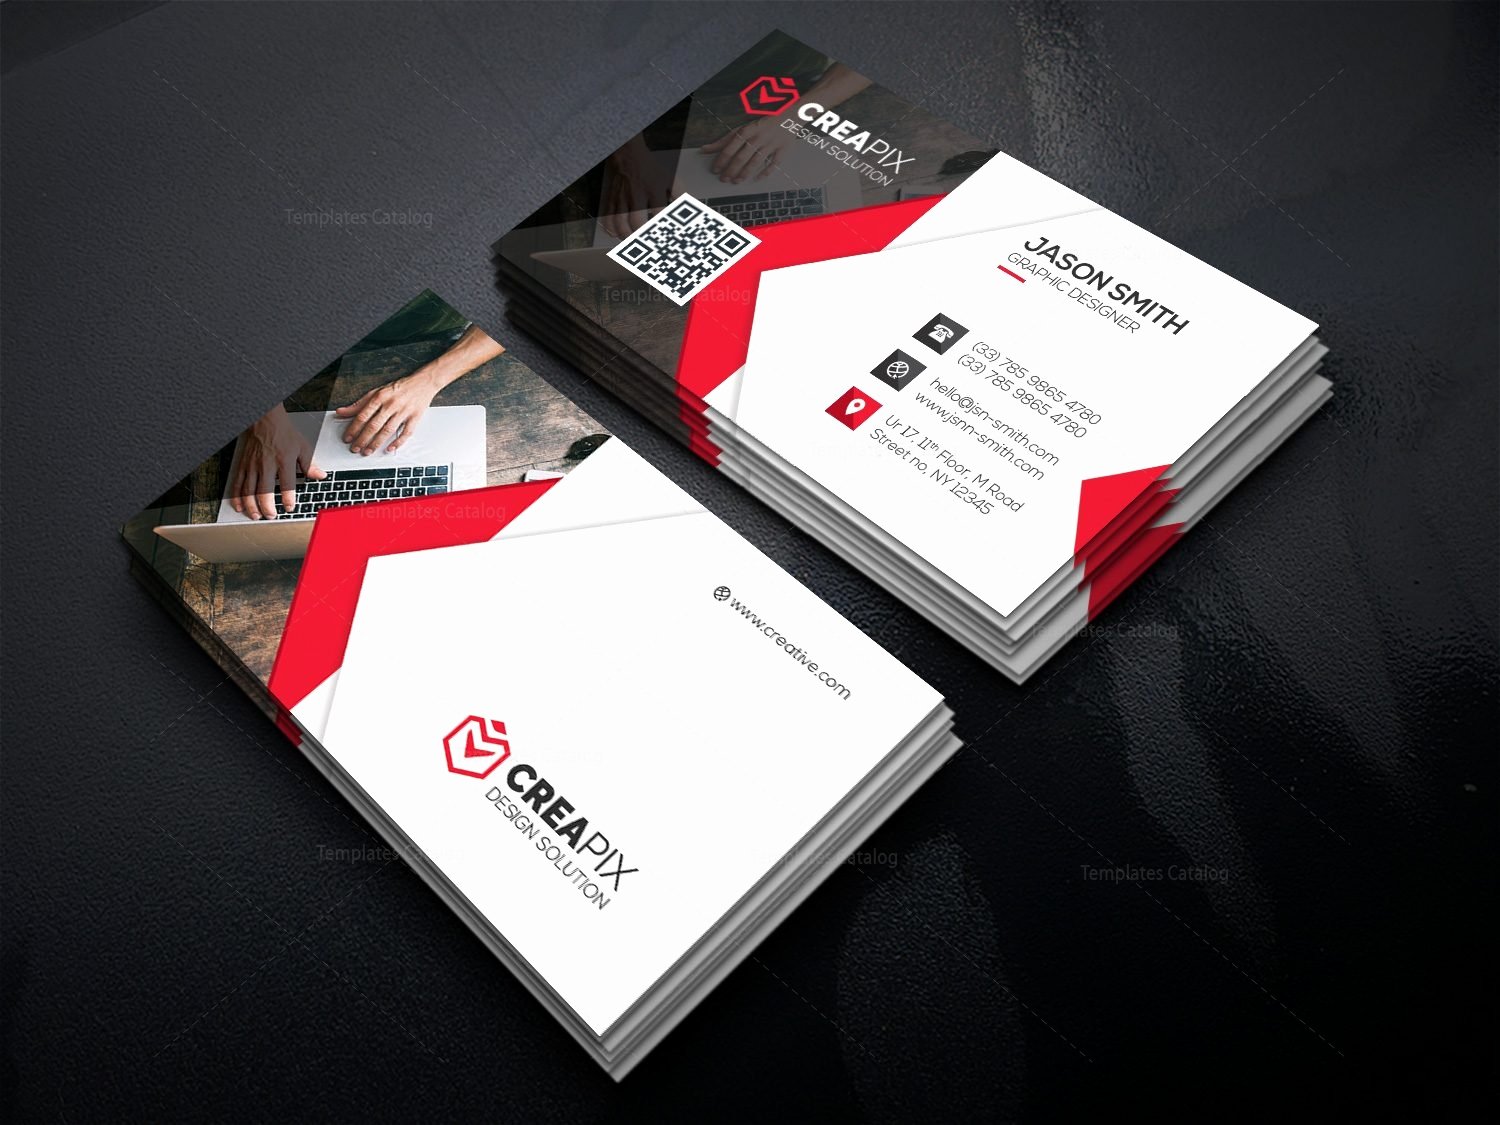 Personal Business Card Template Best Of Personal Business Card Template 4 Template Catalog